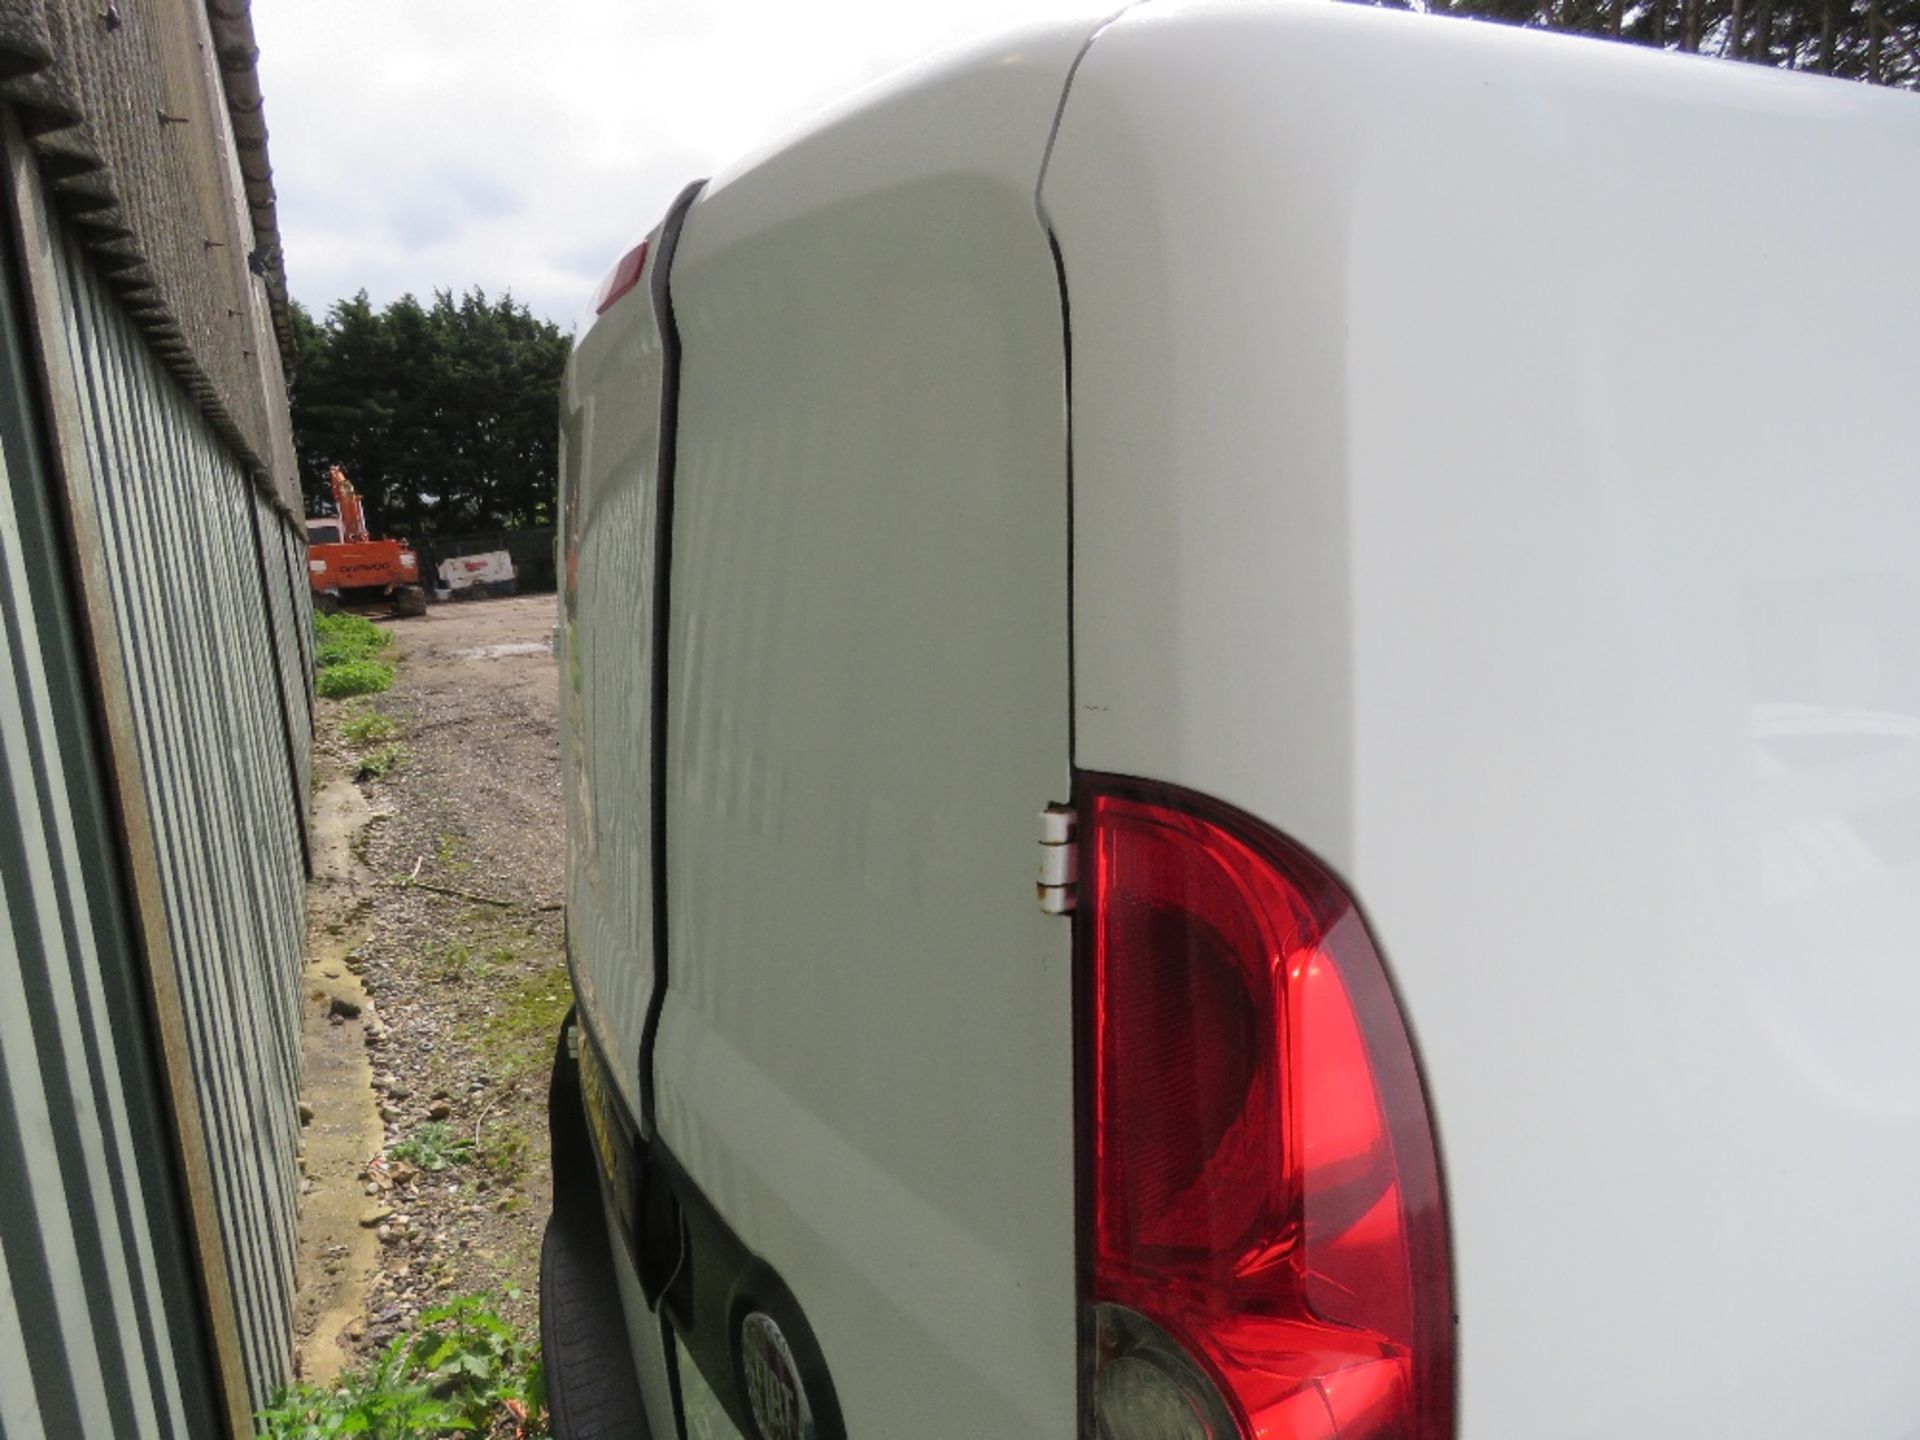 FIAT DOBLO PANEL VAN REG: WV63 HCJ. 84343 REC MILES. WHEN TESTED WAS SEEN TO DRIVE, STEER AND BRAKE. - Image 7 of 12